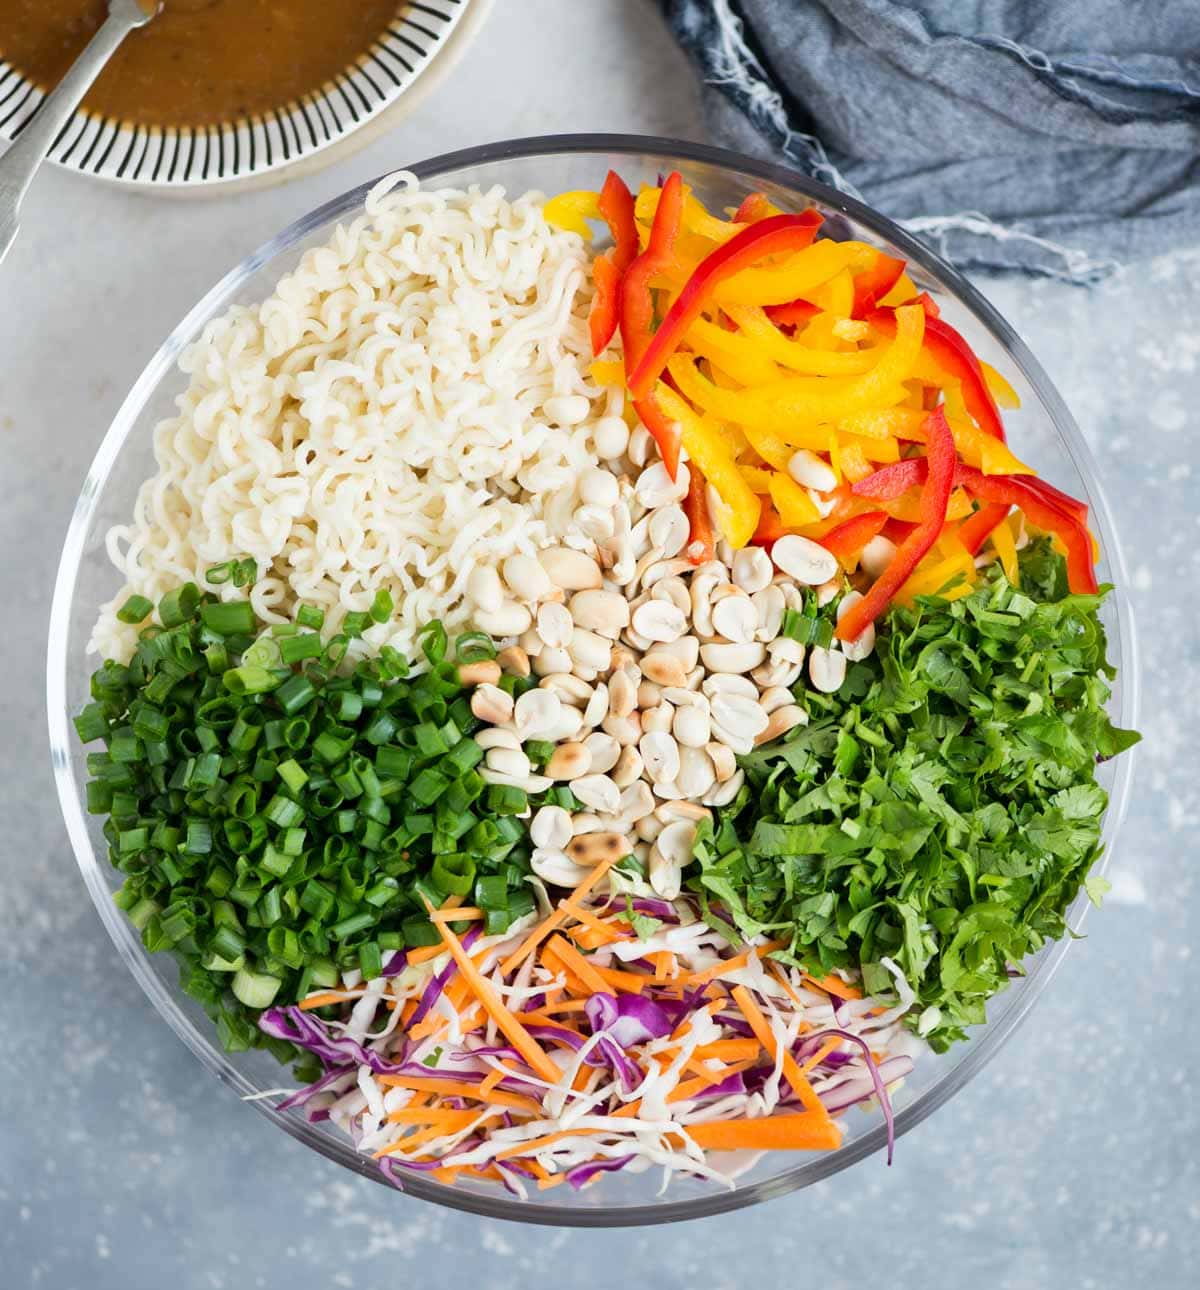 Ingredients for making Ramen Noodle Salad - Ramen noodle, coleslaw mix, bell pepper, green onion, roasted peanuts and asian peanut butter dressing.